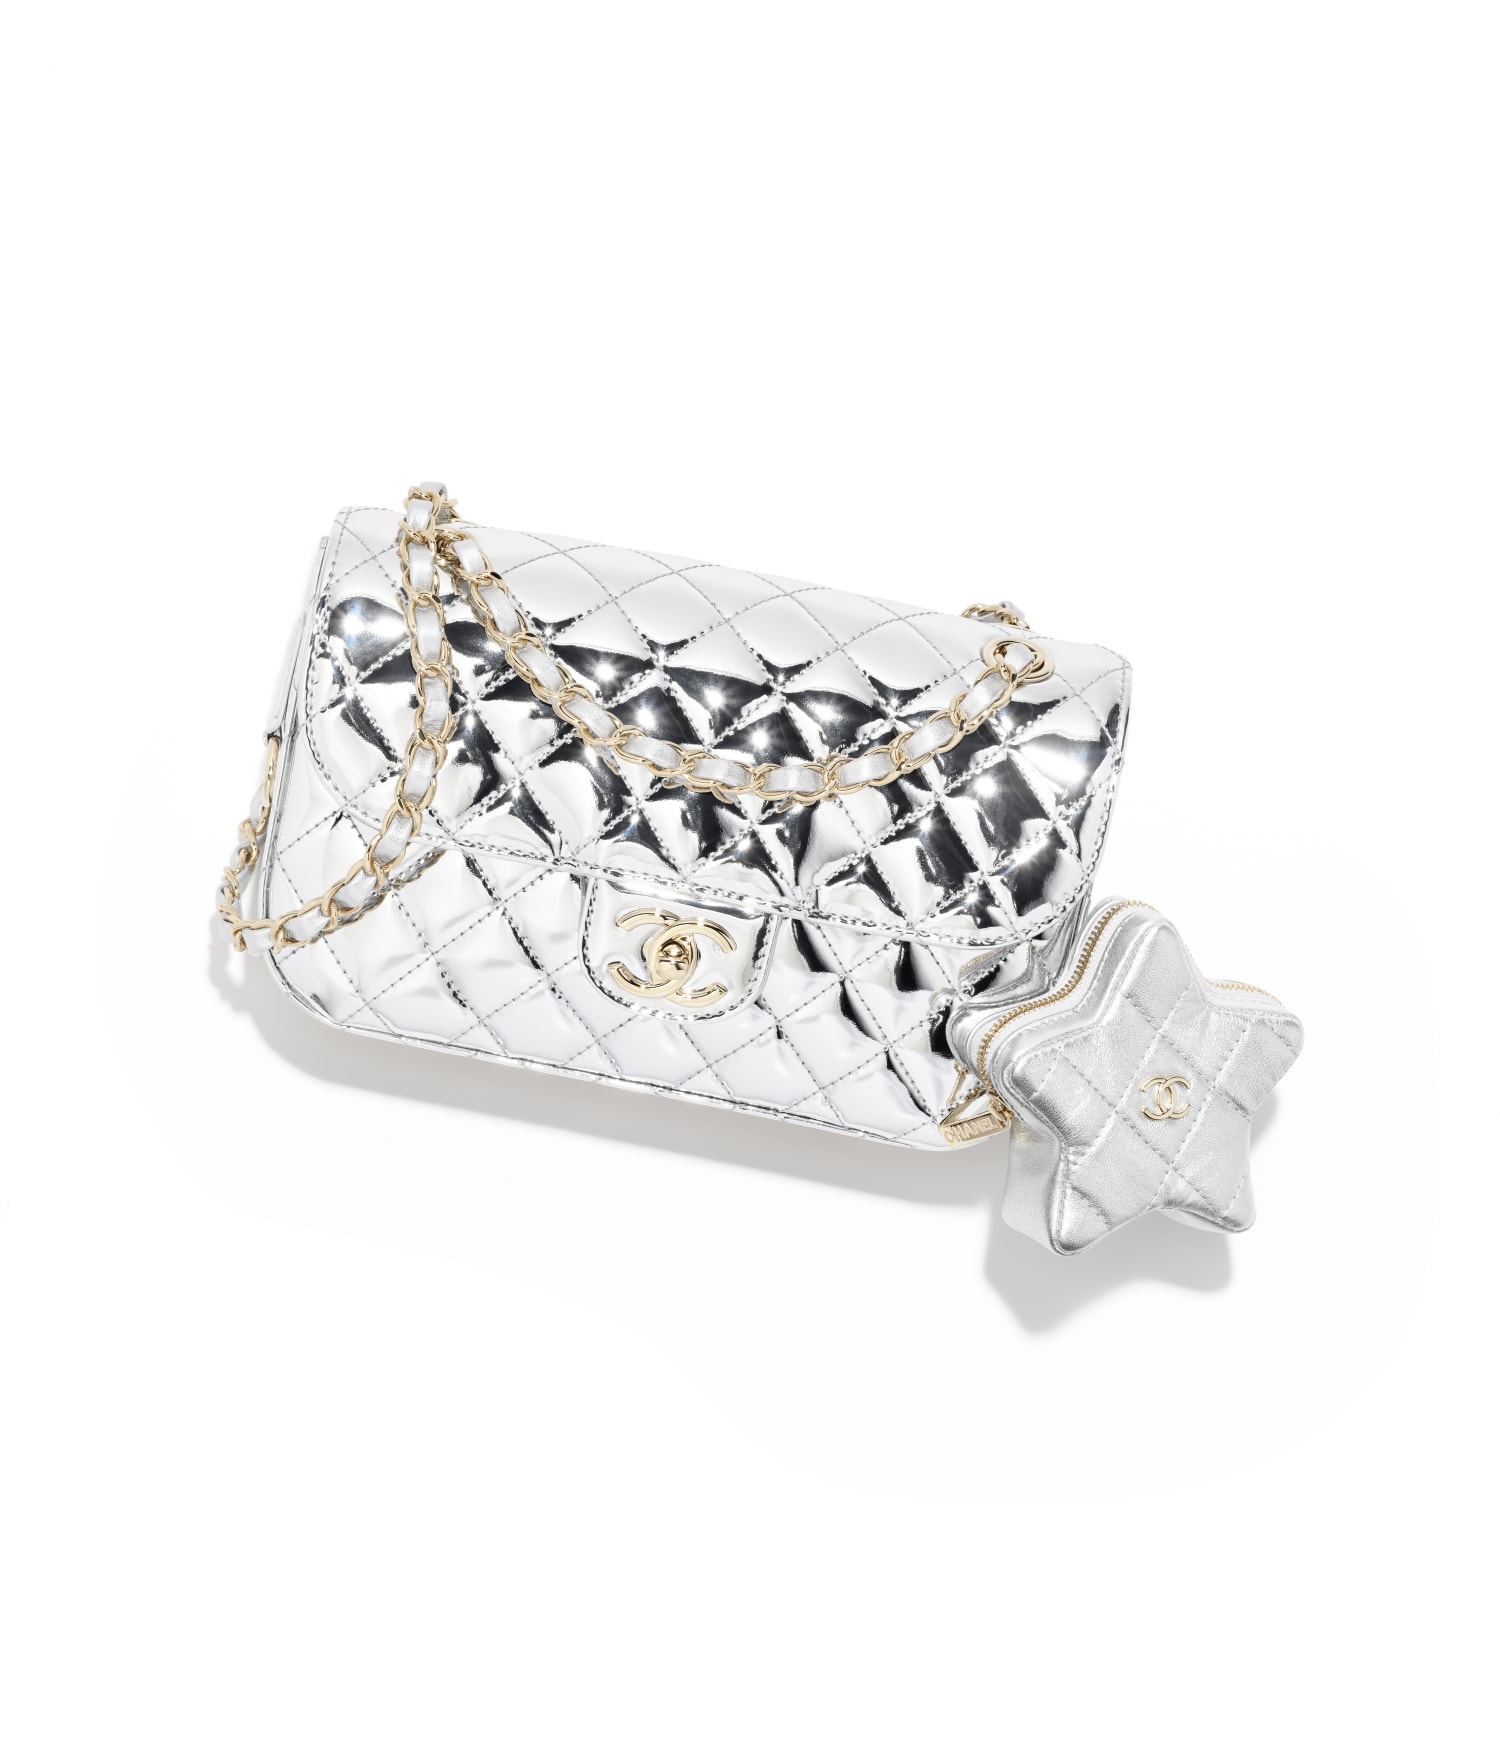 chanel_bag-in-silver-mirror-leather-metallic-leather-and-metal-as4648-b14873-nt666-hd-LD